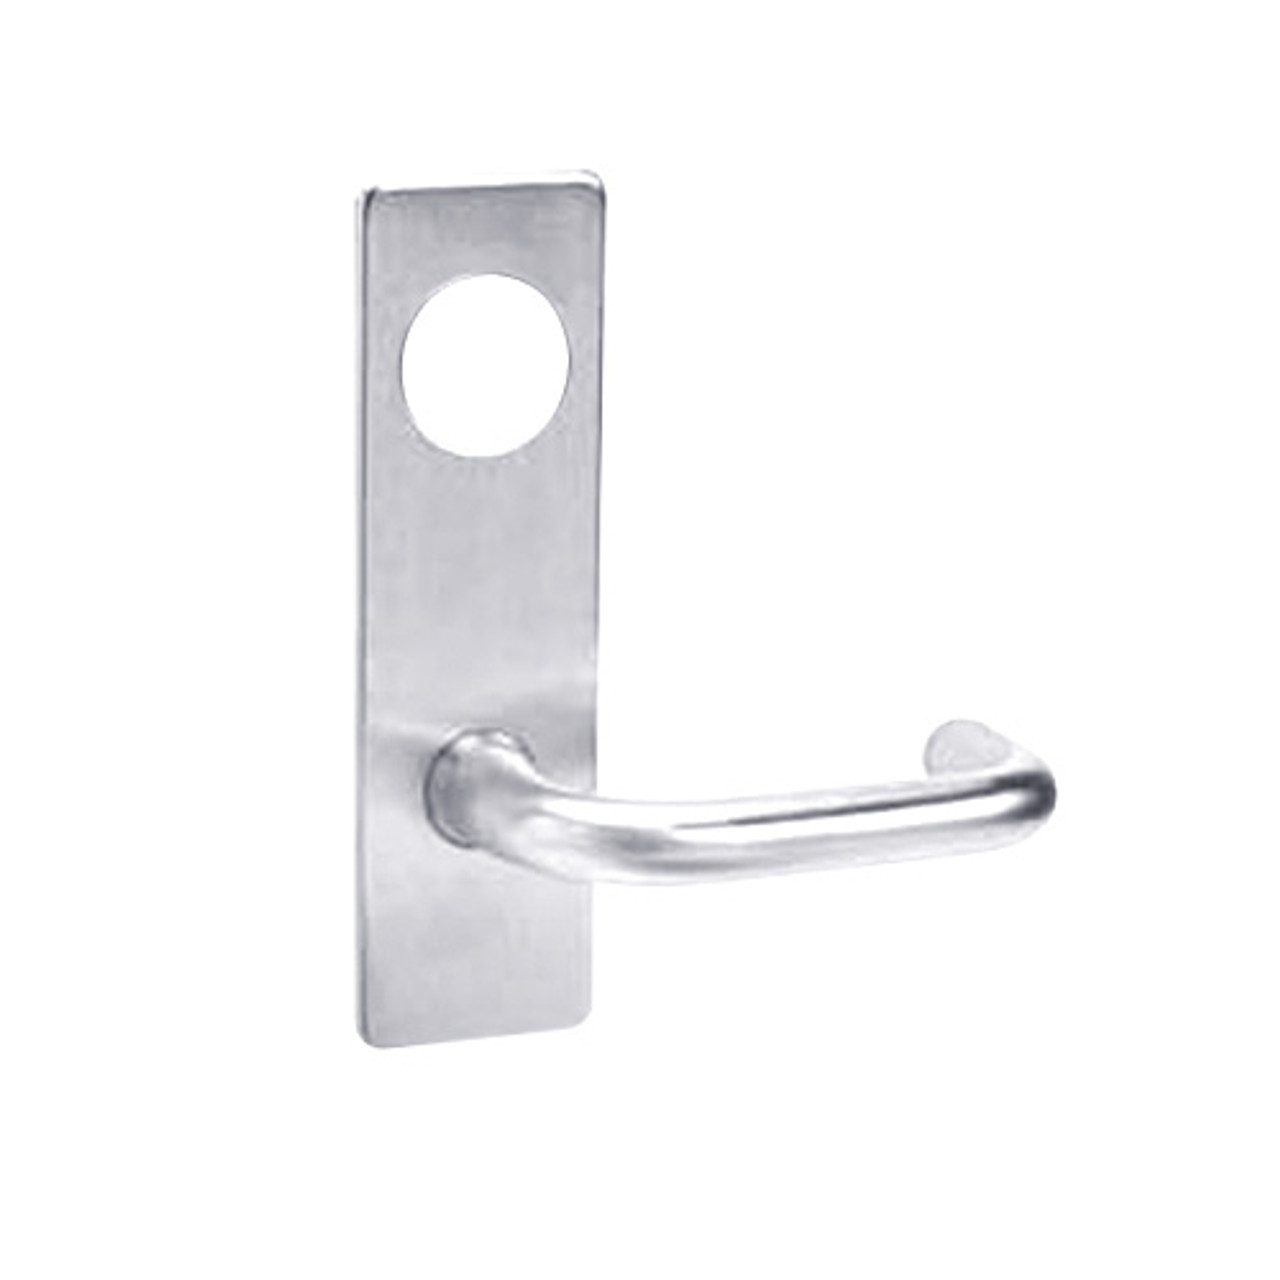 ML2051-LSM-625-CL7 Corbin Russwin ML2000 Series IC 7-Pin Less Core Mortise Office Locksets with Lustra Lever in Bright Chrome